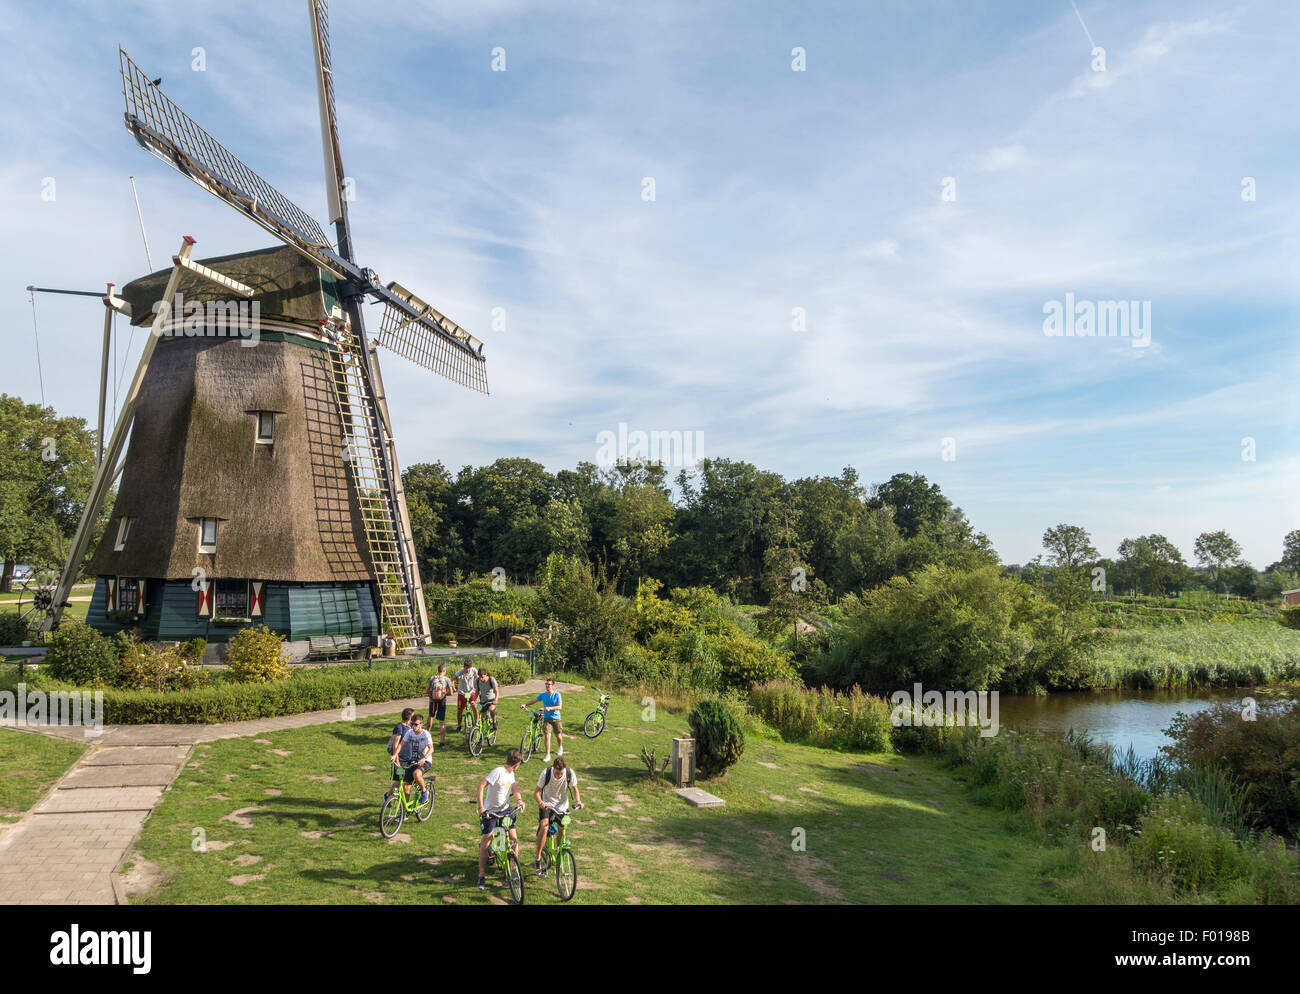 Amsterdam, the Rieker Windmill, de Riekermolen, on the Amstel River where  Rembrandt used to sketch. Young tour group on bicycle Stock Photo - Alamy